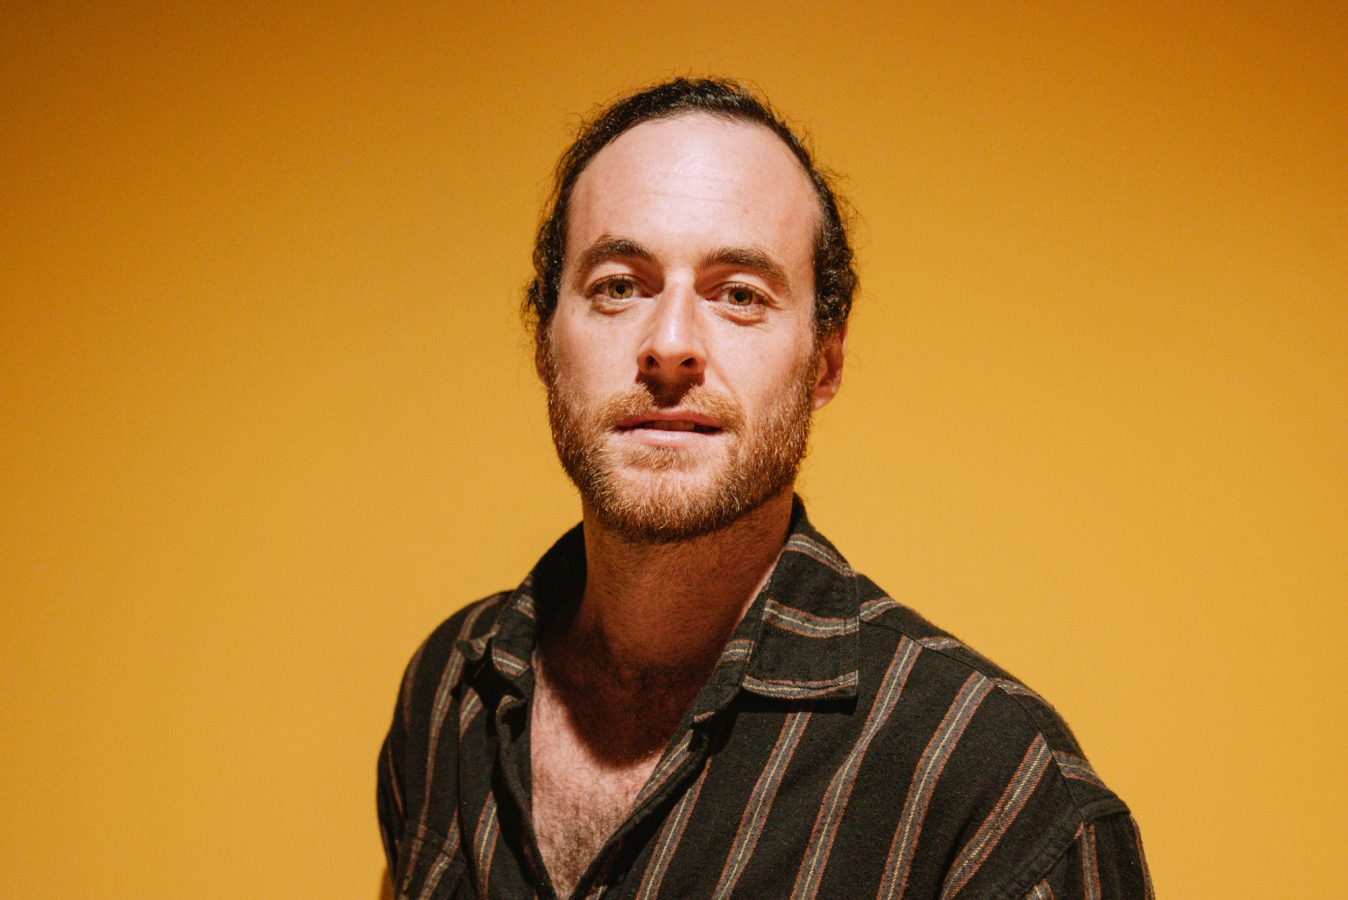 Head and shoulder shot of Sam Rees with dark hair tied back, wearing a striped striped shirt in front of a yellow background.